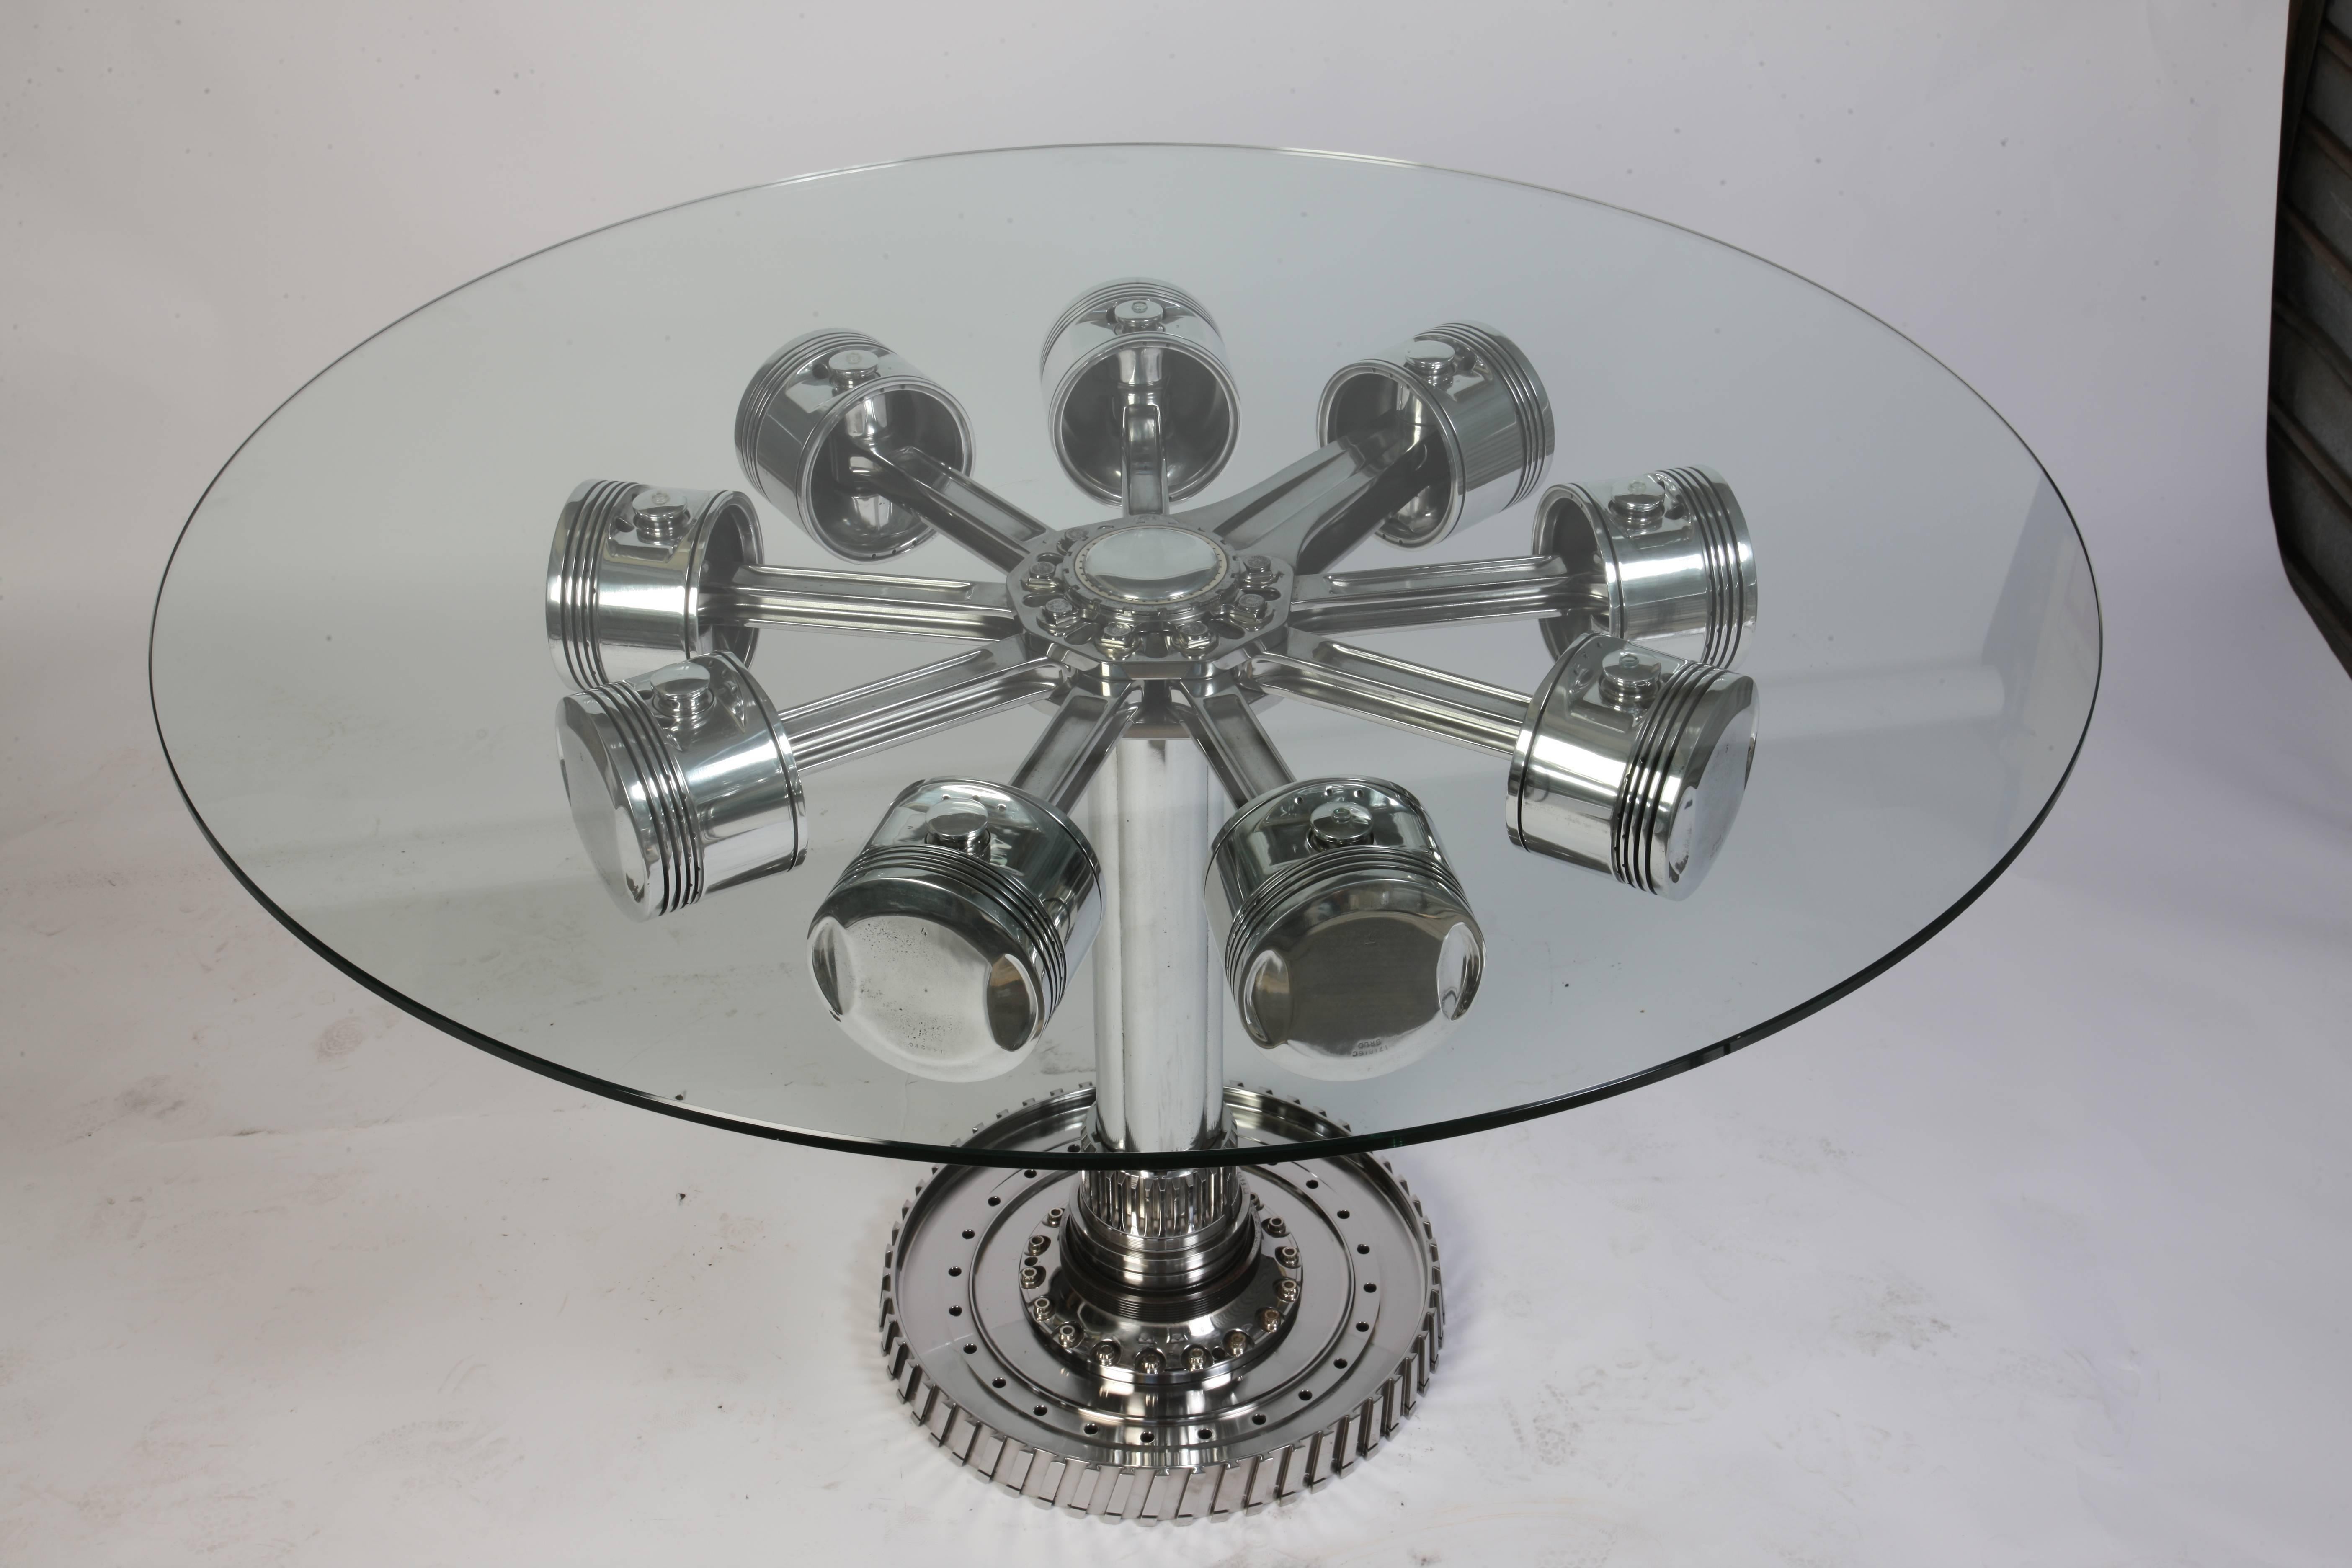 Aviation furniture dining table with radial engine pistons from B17 Flying Fortress engine
AVIATIONSPIRIT by Jean-Pierre Carpentier. Aircraft table, aeronautical furniture, mobilier aeronautic.
Glass top diameter 1m30.
 

+20% VAT for CEE.